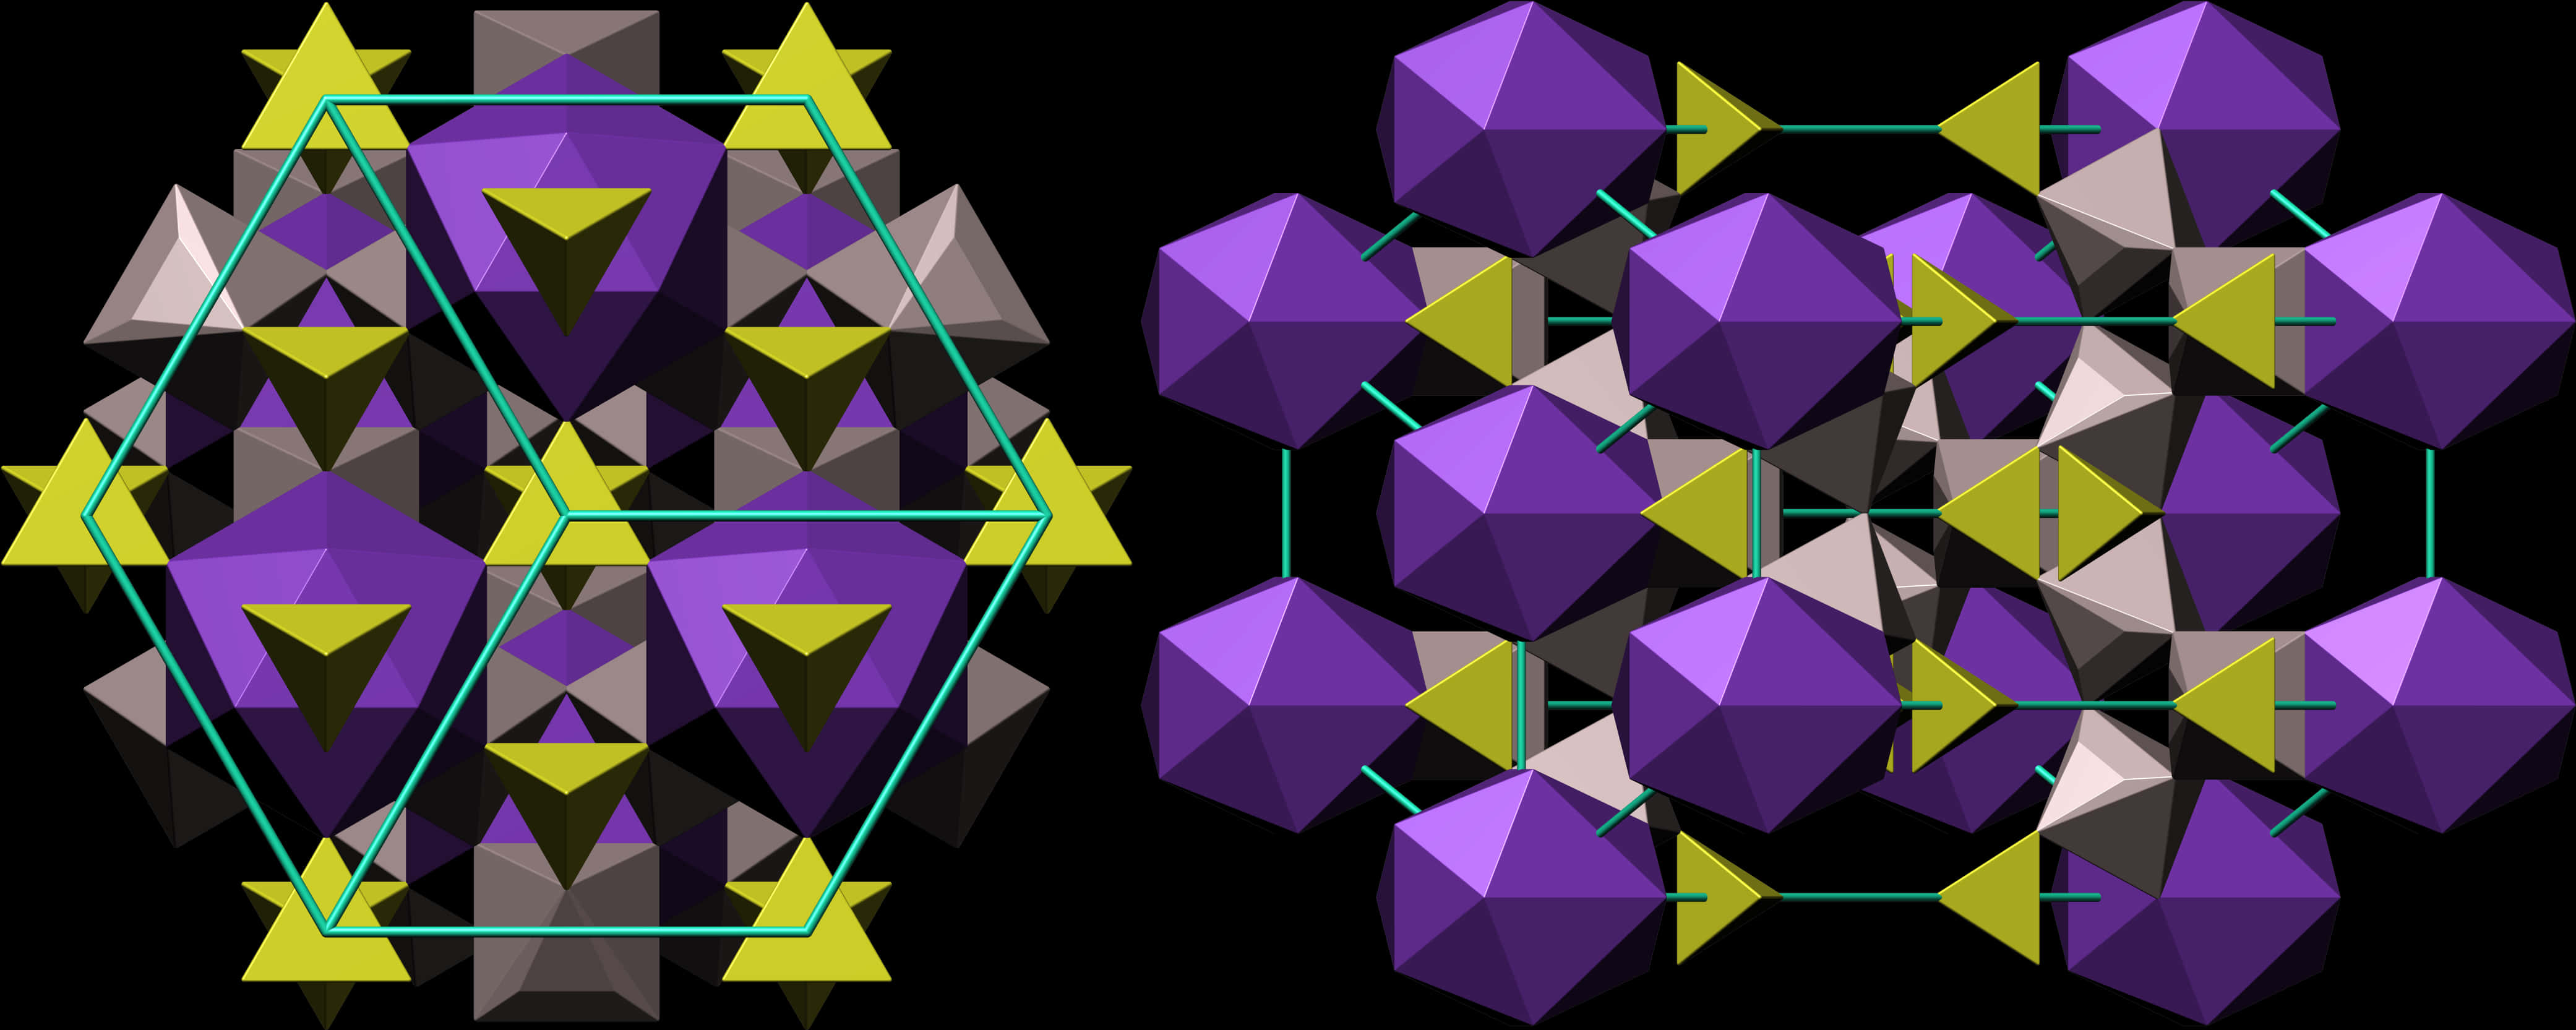 A Purple And Yellow Geometric Shapes